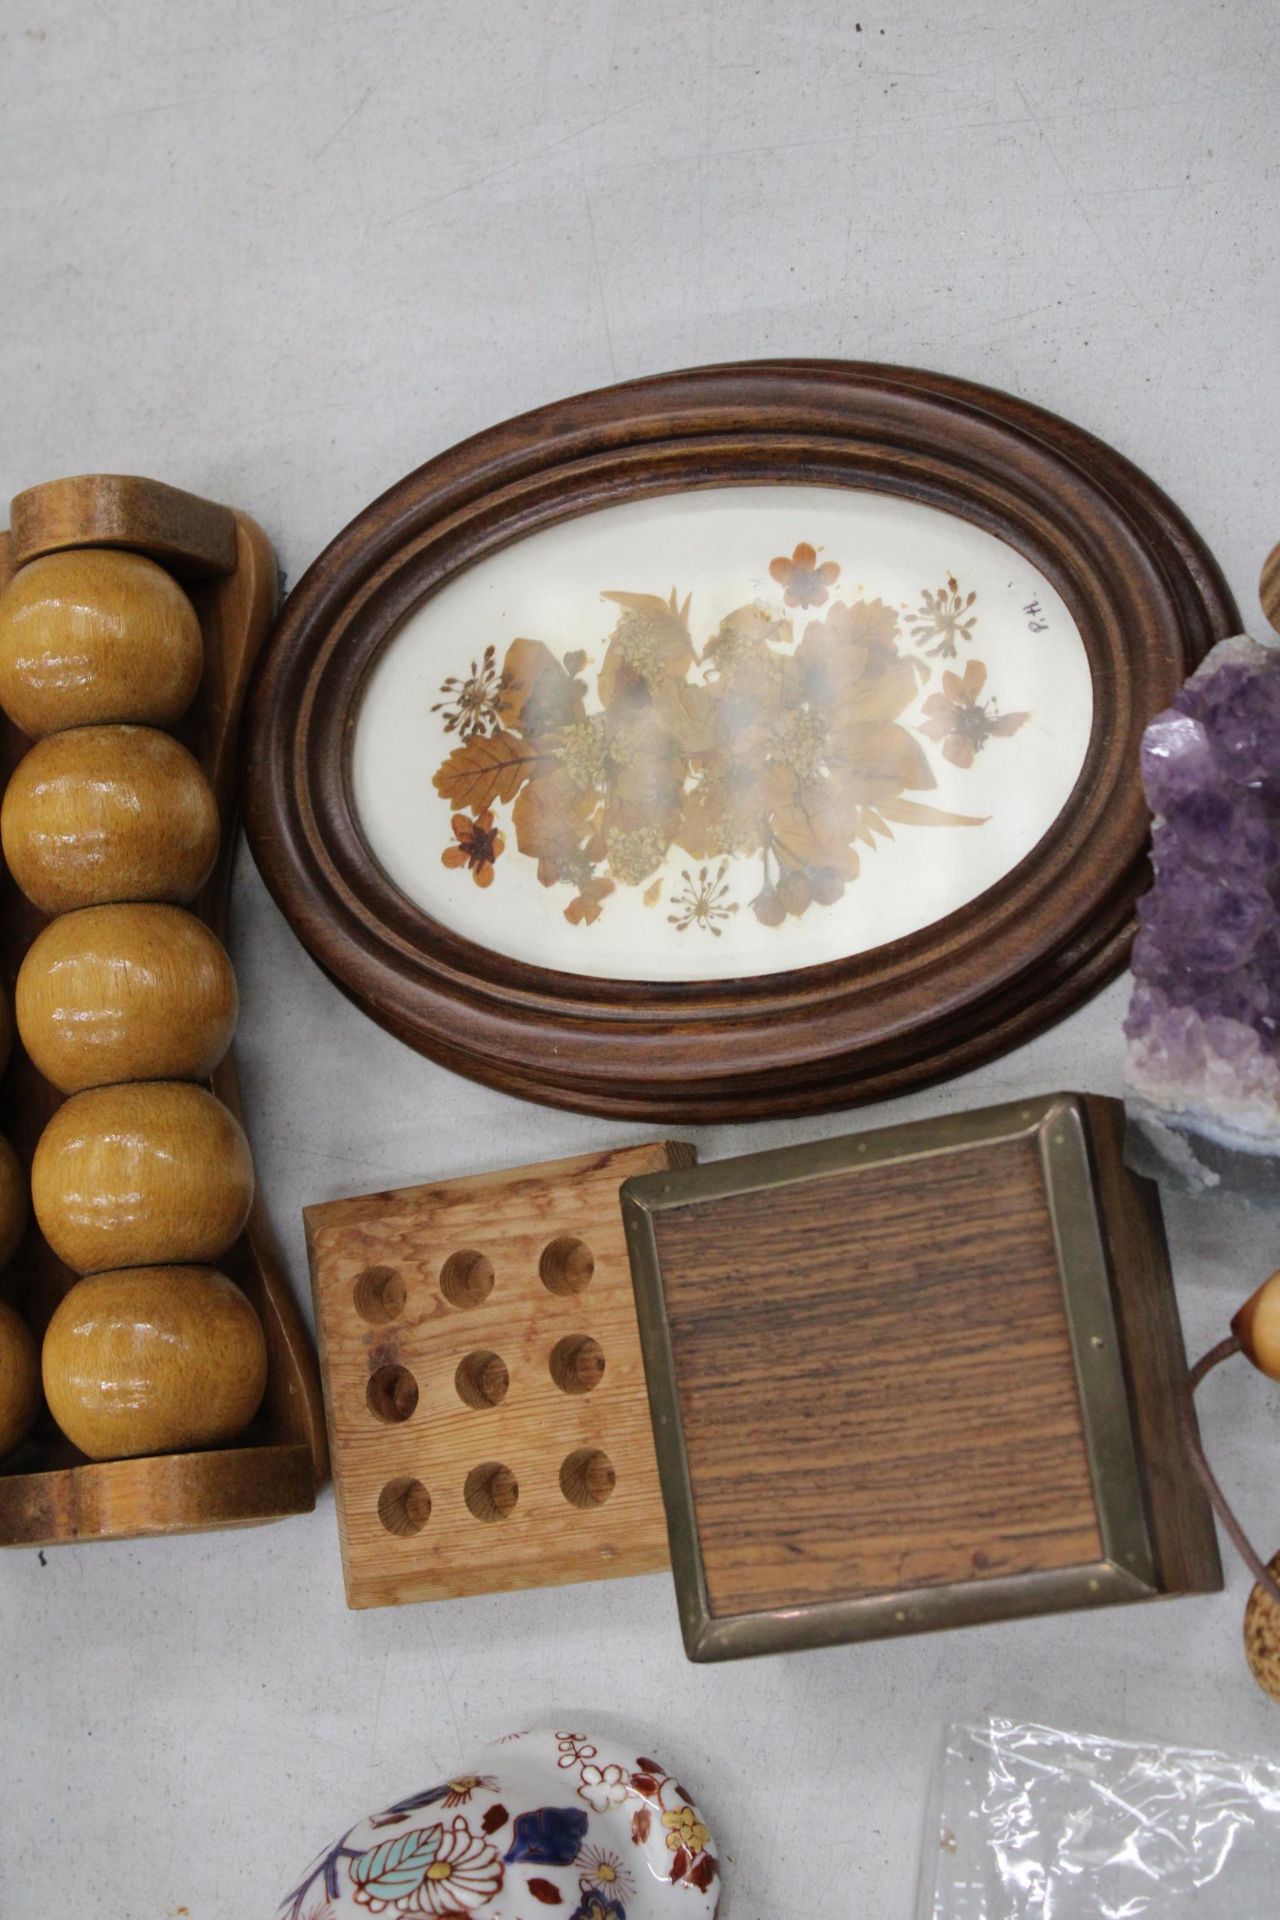 A QUANTITY OF ITEMS TO INCLUDE TREEN BOWLS, SMALL LIDDEDPOTS, MINIATURE ANIMALS, A TERRECOTTA BULL - Image 6 of 7